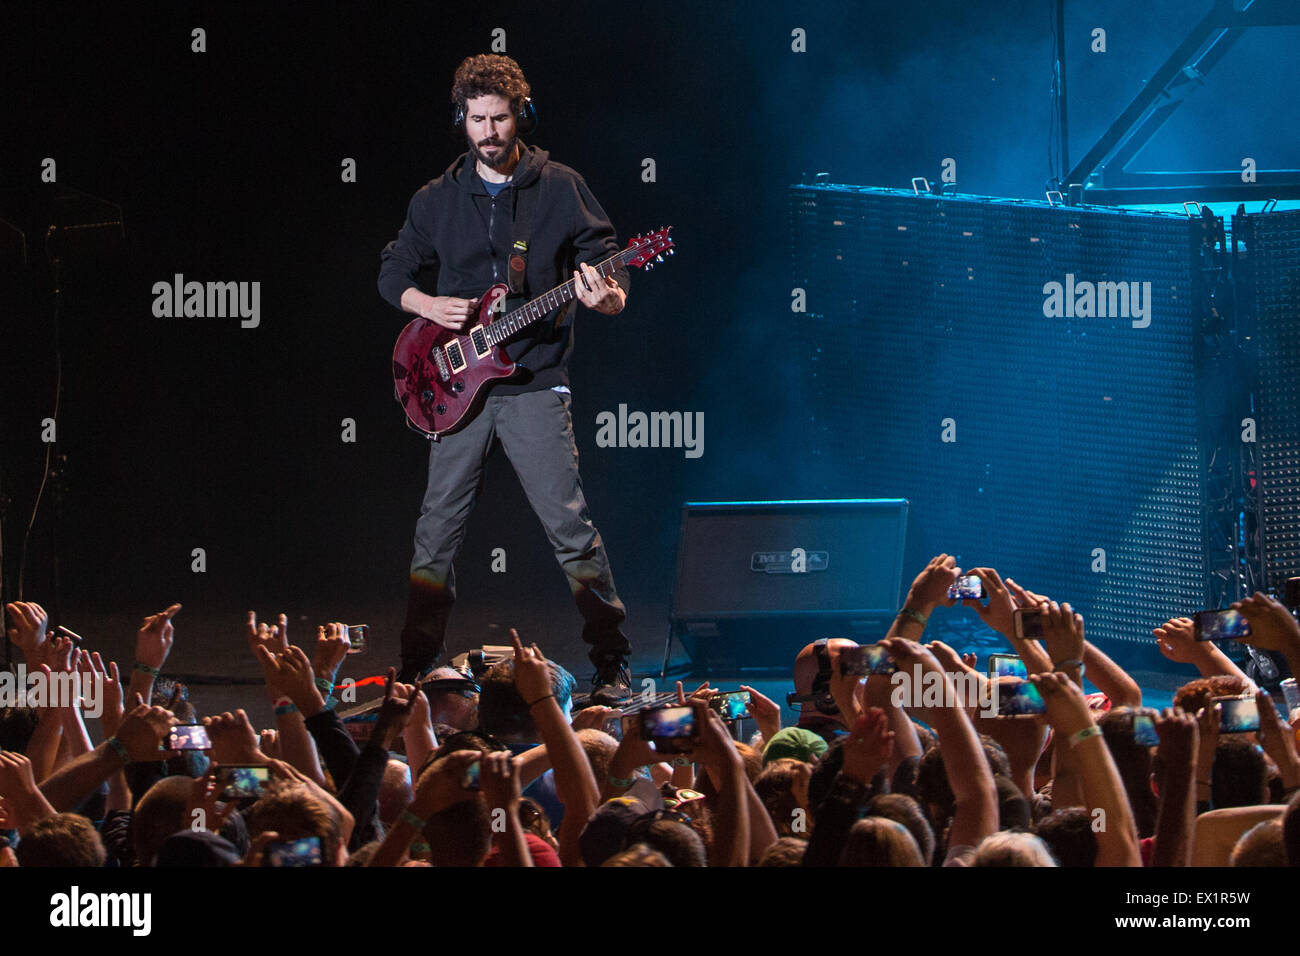 Milwaukee, Wisconsin, USA. 30th June, 2015. Guitarist BRAD DELSON of Linkin Park performs live on stage at the Summerfest Music Festival in Milwaukee, Wisconsin © Daniel DeSlover/ZUMA Wire/Alamy Live News Stock Photo